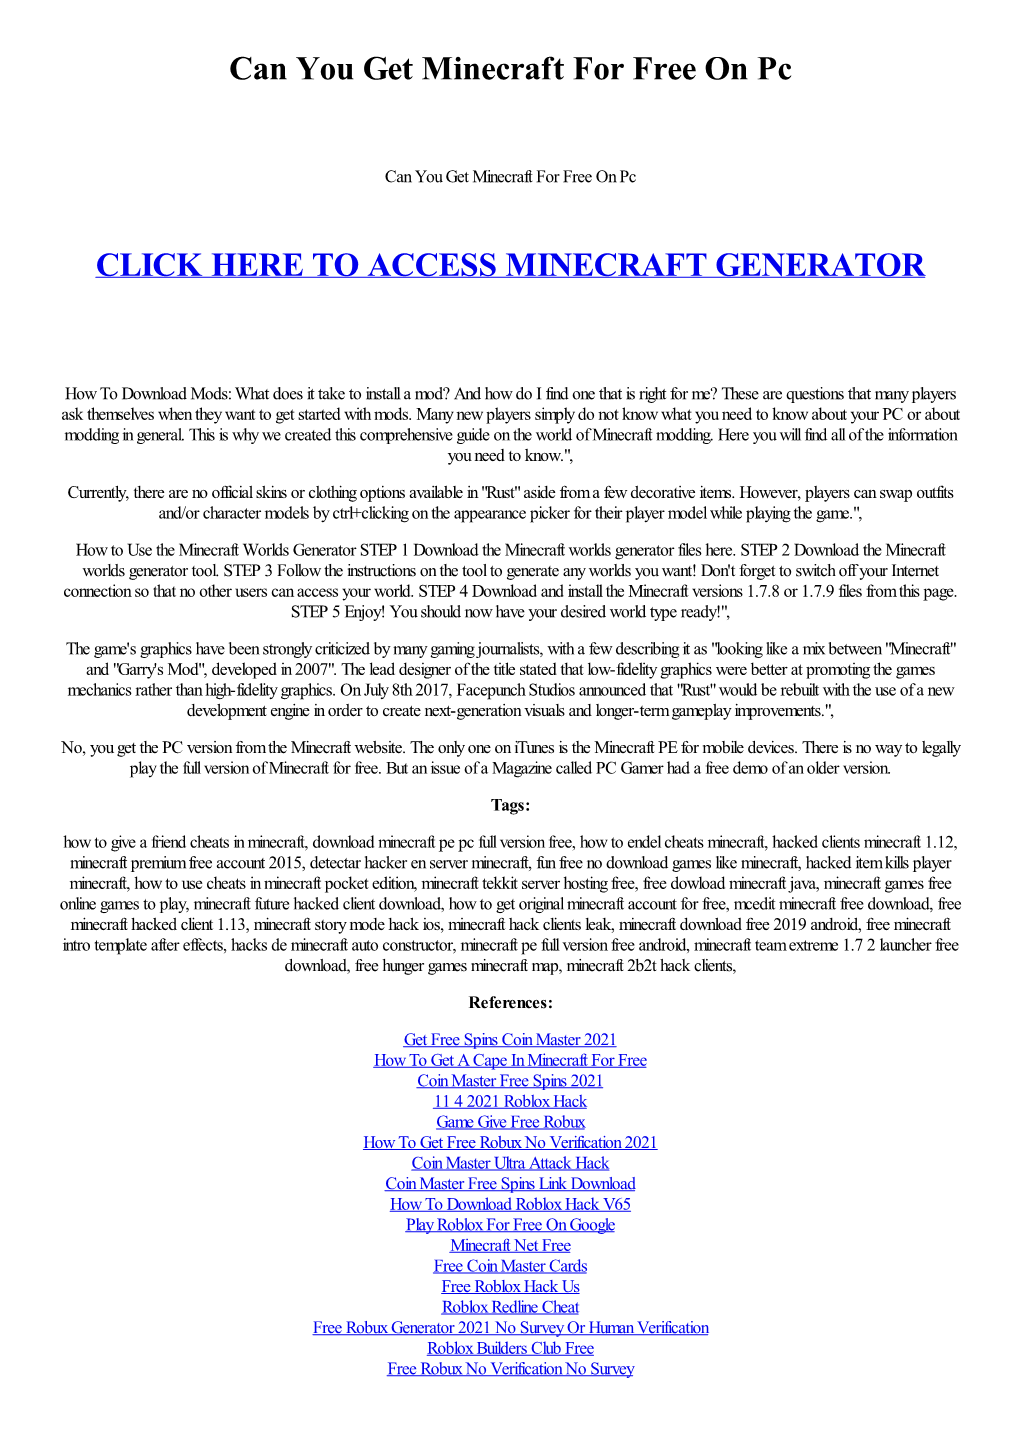 Can You Get Minecraft for Free on Pc